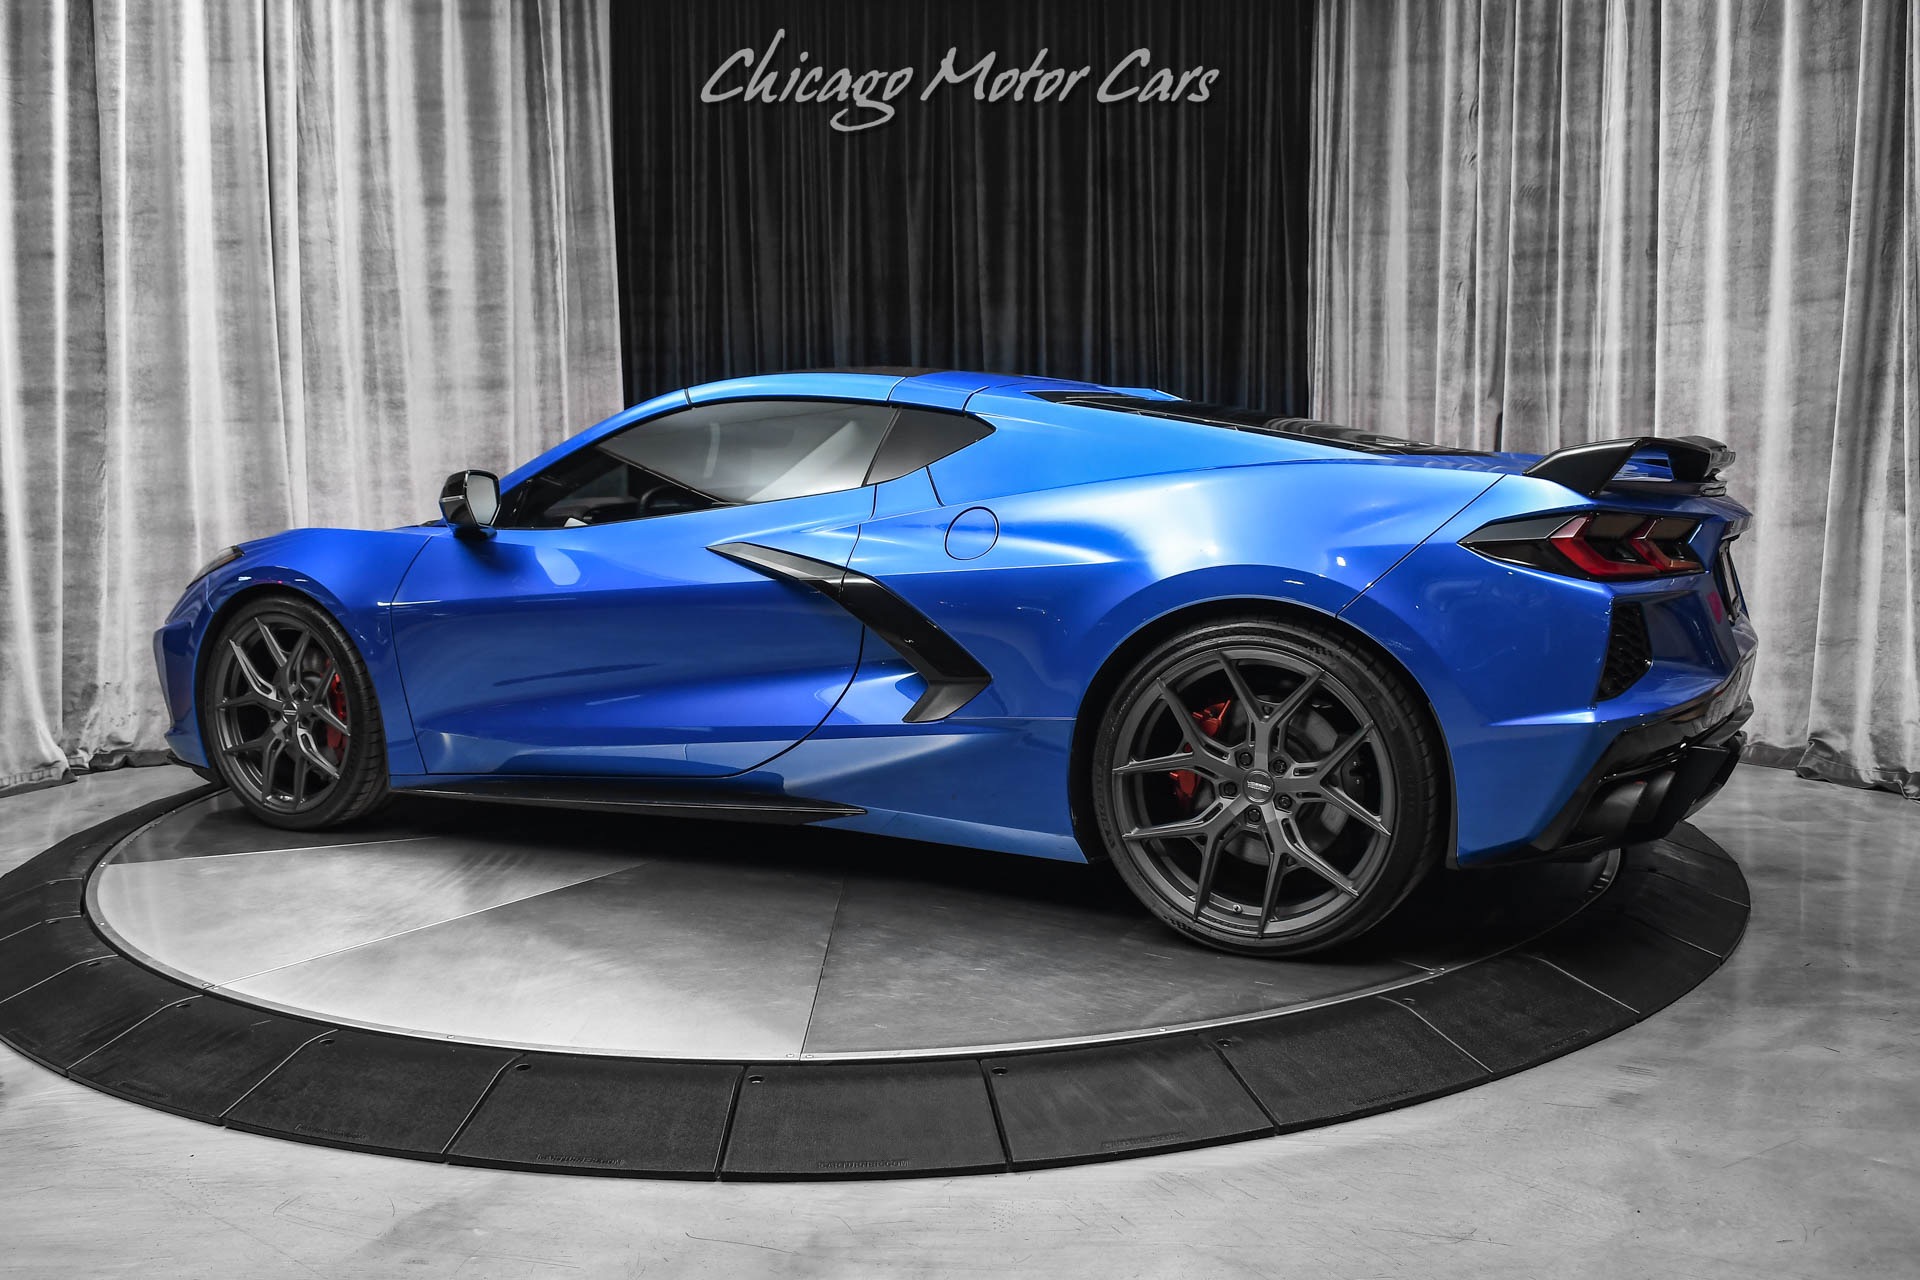 Used-2020-Chevrolet-Corvette-Stingray-3LT-C8-Coupe-with-Z51-Performance-Pkg-Carbon-Roof-Magnetic-Ride